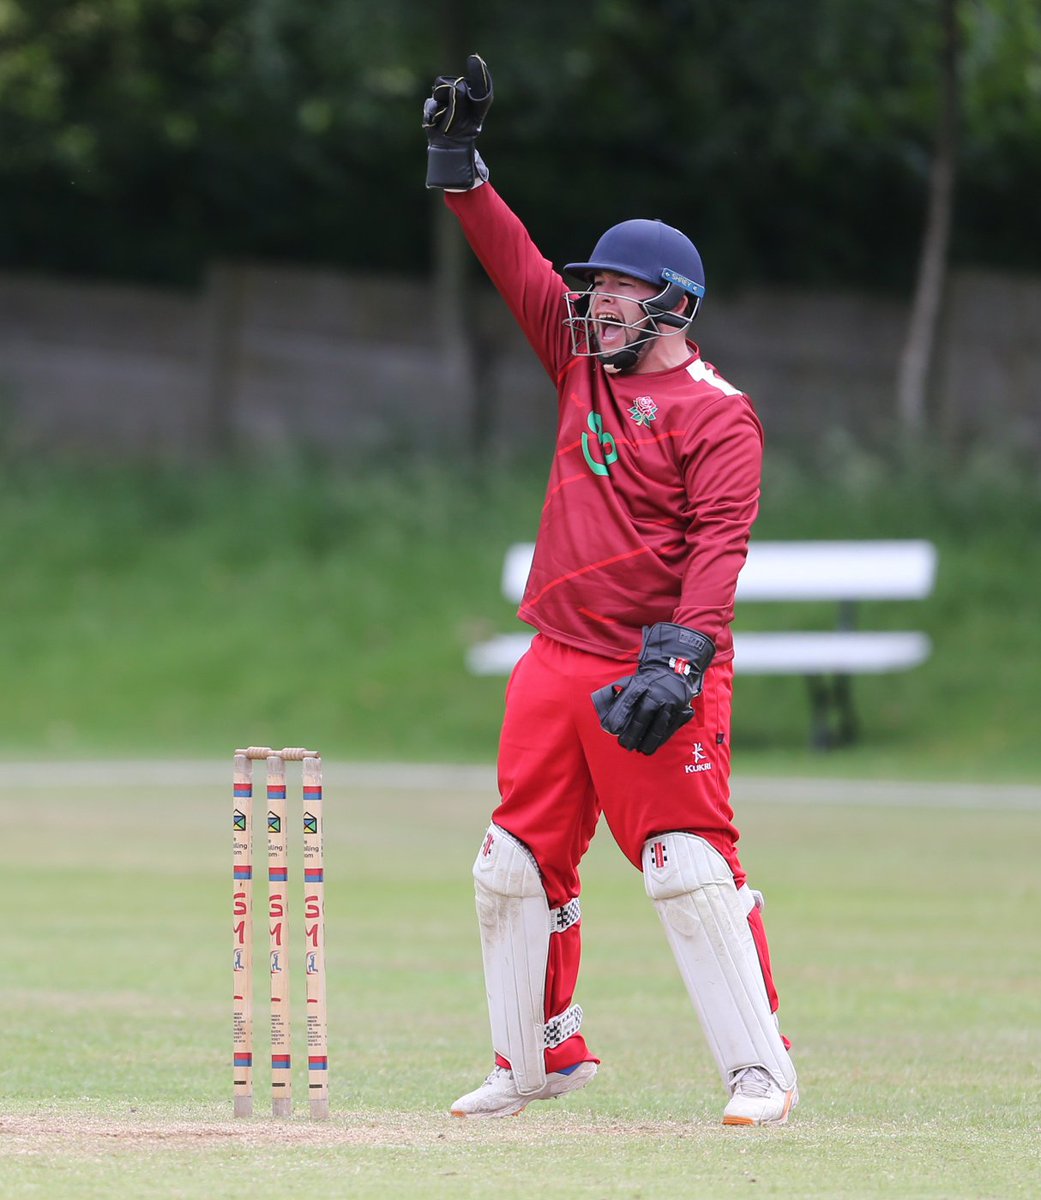 Luke James (Tridents) - LD - Opening Batter and Wicket Keeper from @FBCC1833. Joined D40 last season and has been a huge asset with his attacking mentality at the top of the batting order.